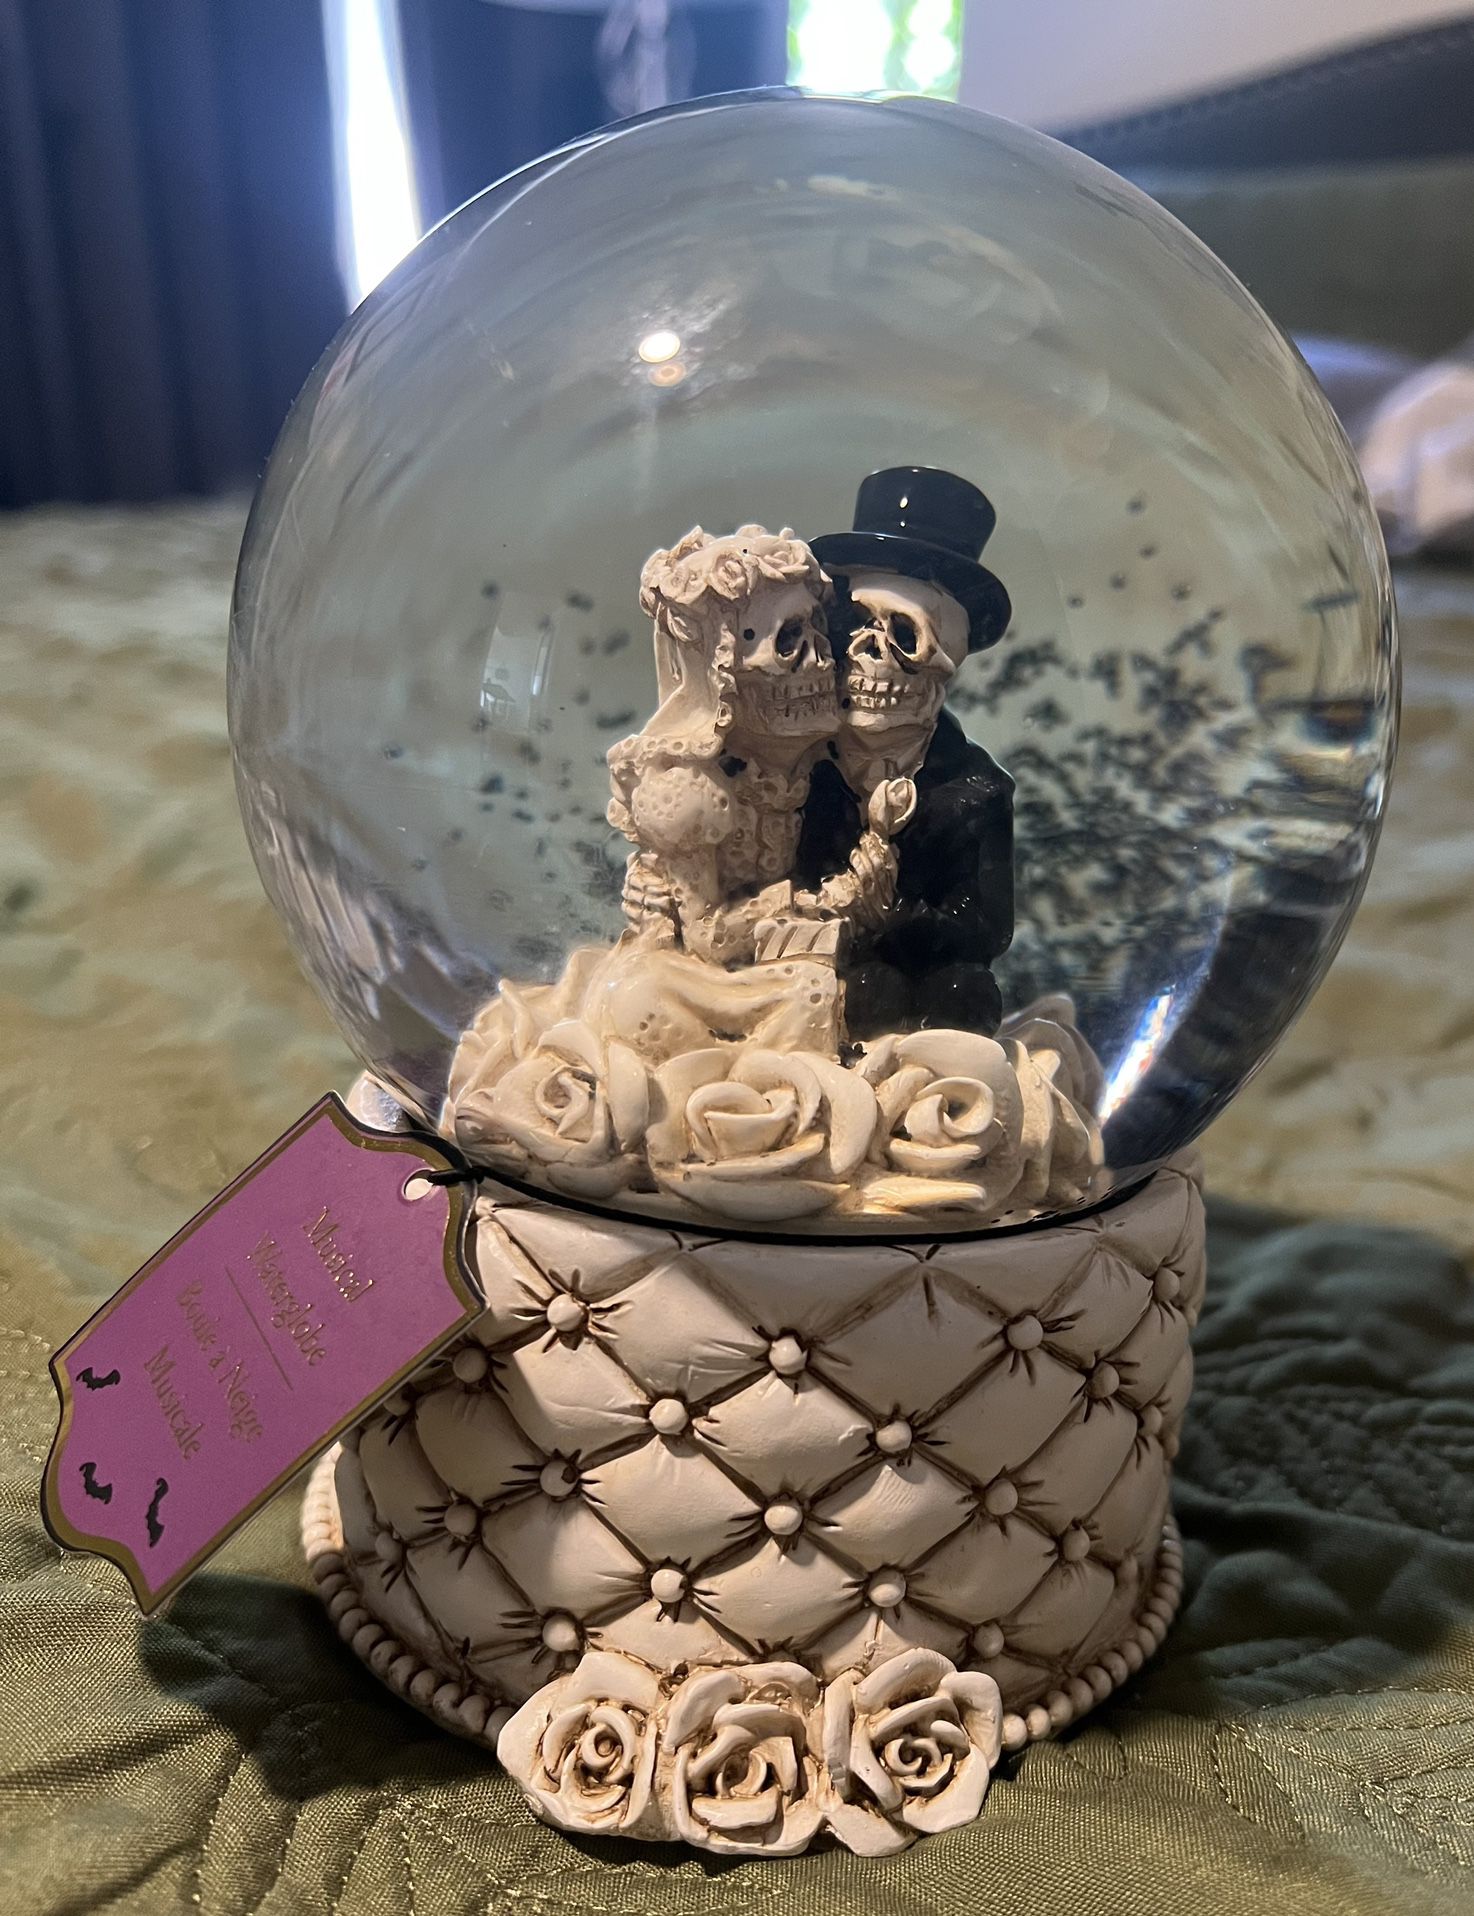 Moonlight Manor musical skeleton bride and groom Snow Globe - New With Tag!